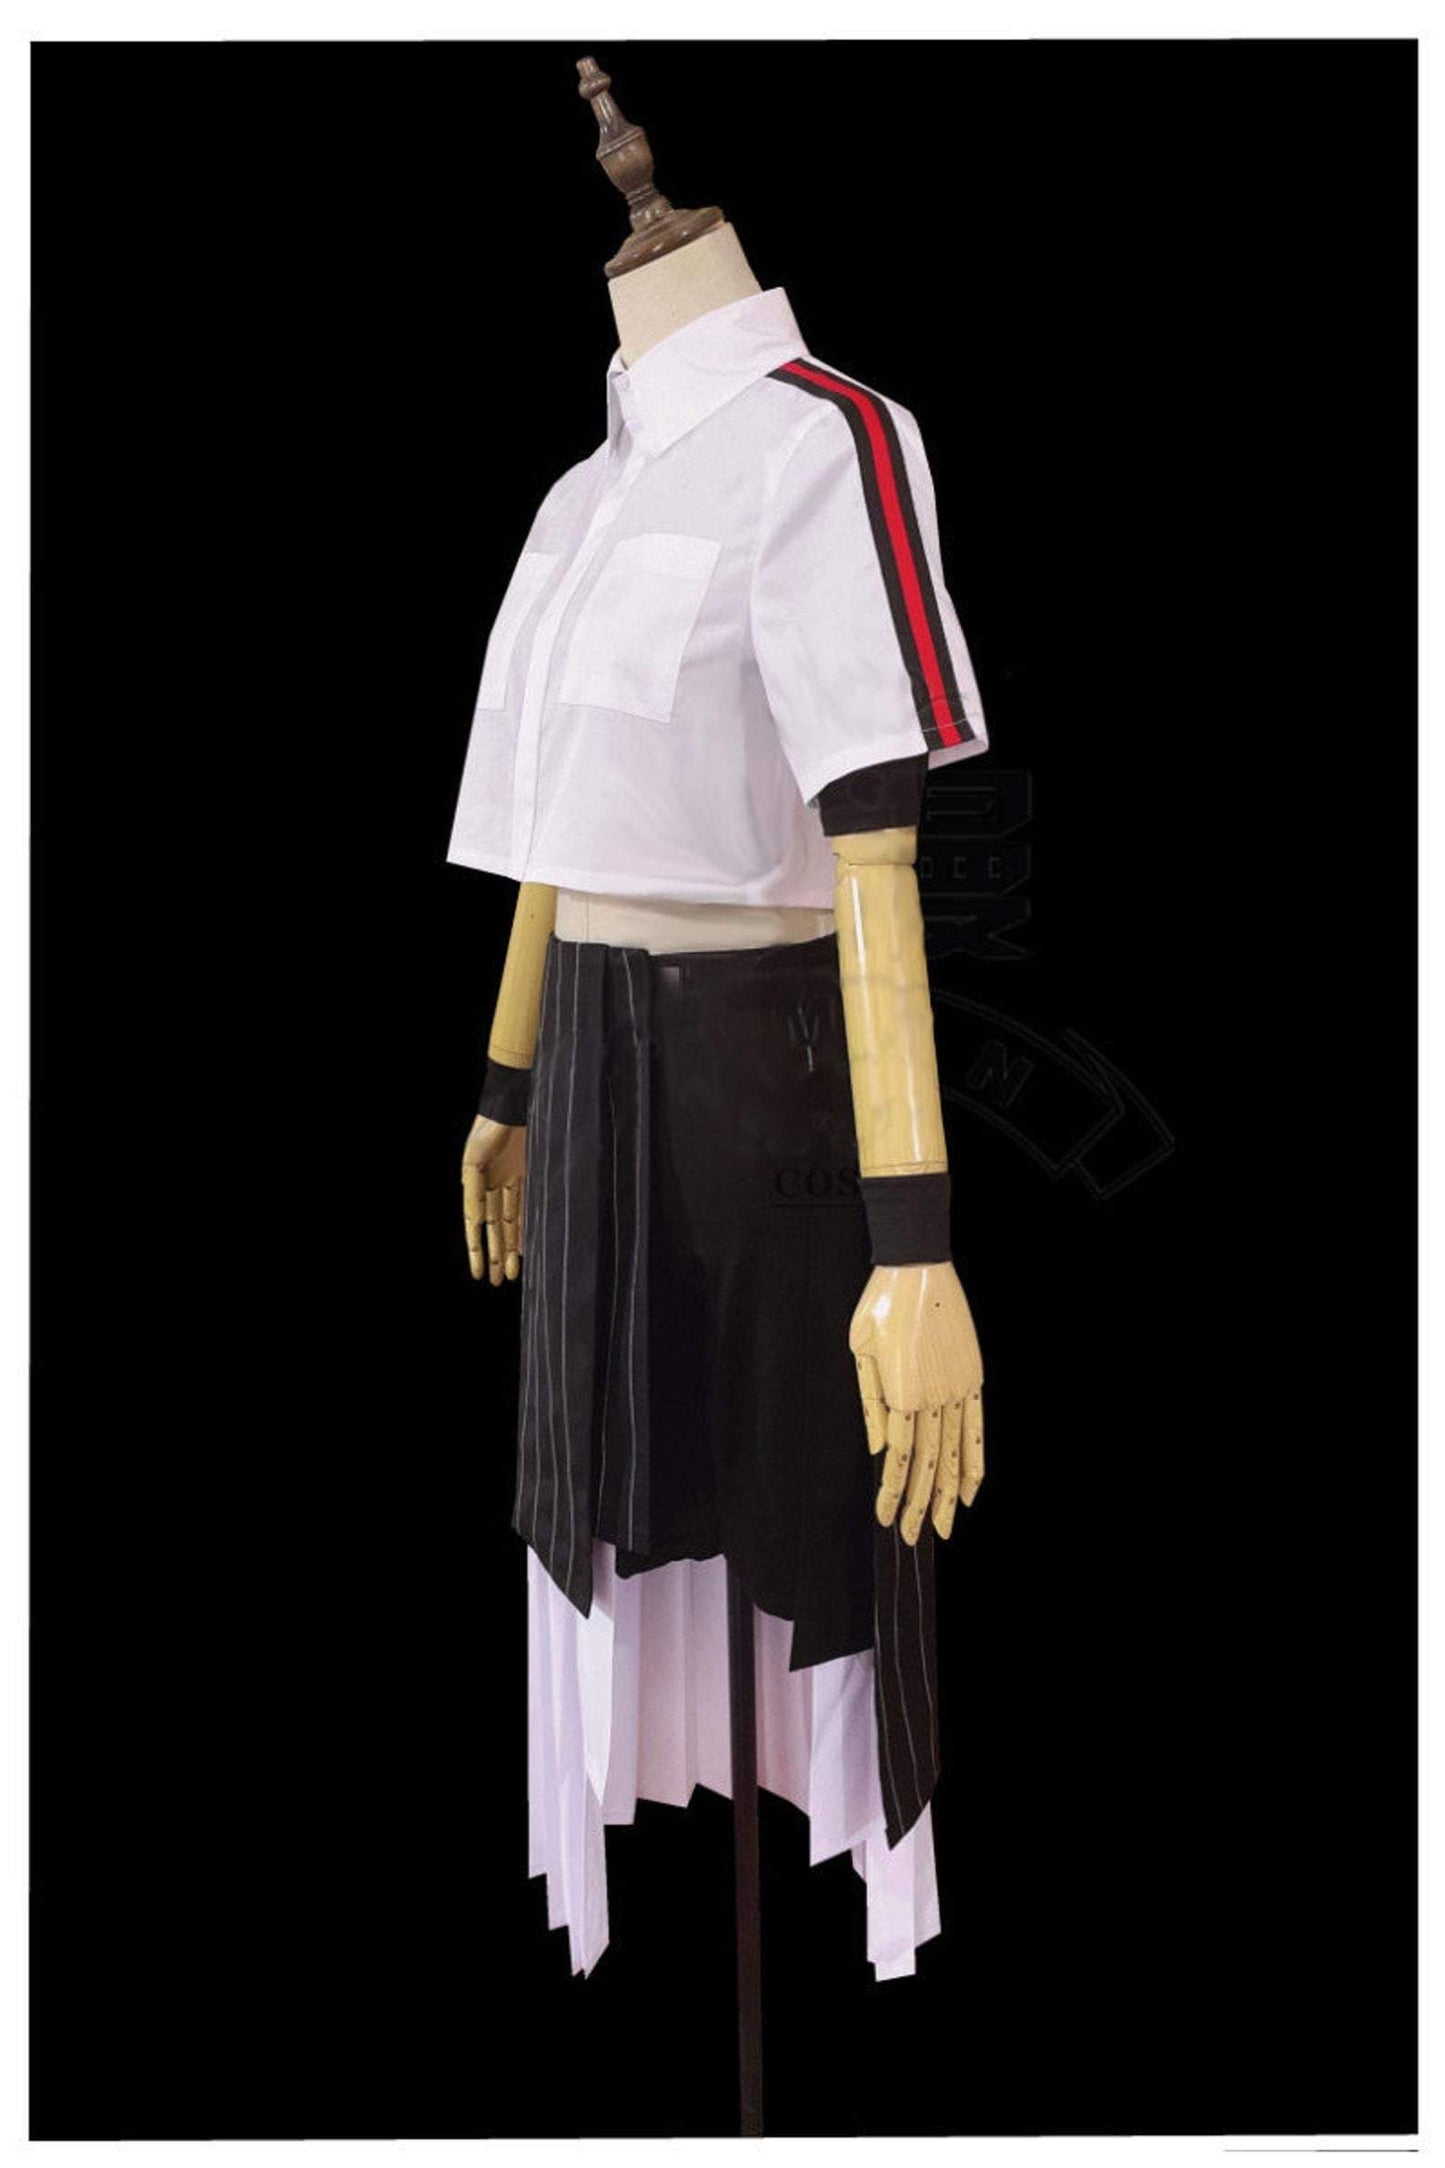 Qiao Ling Cosplay Costume Anime Link Click Cosplay Shiguang Daili Ren Kawaii Ling qiao Suit High quality Cute Clothing sets daily-Link Click - MoonCos